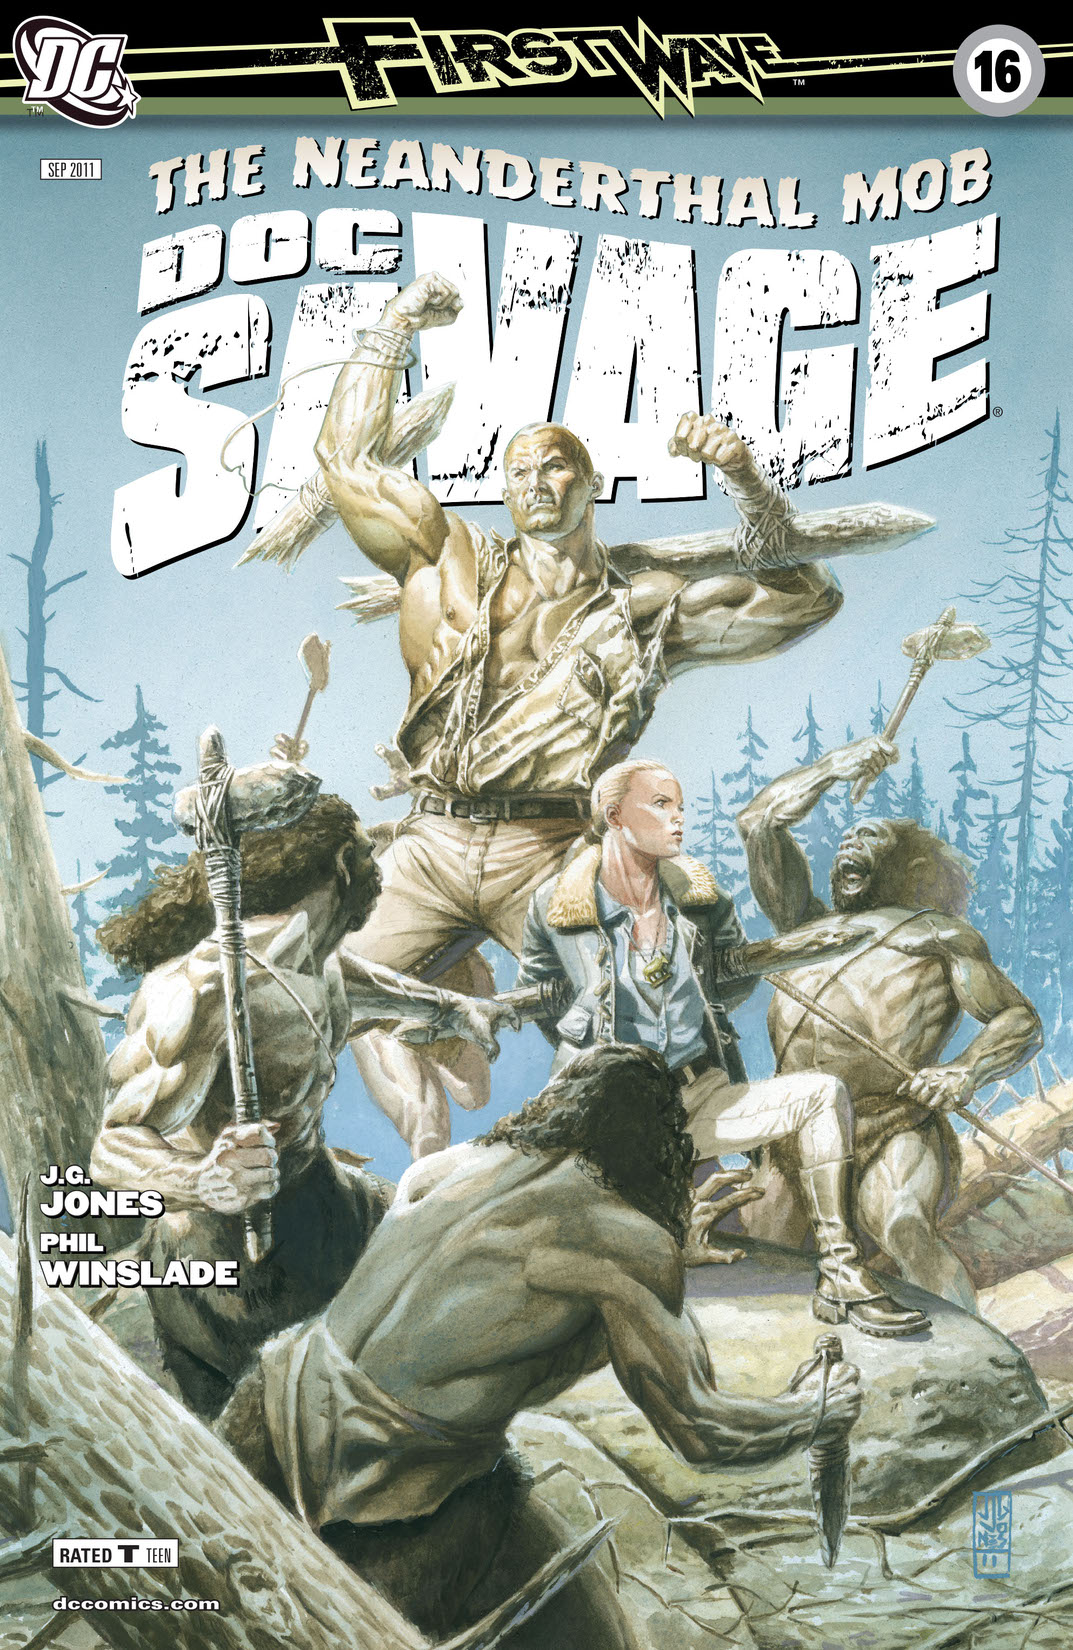 Doc Savage #16 preview images